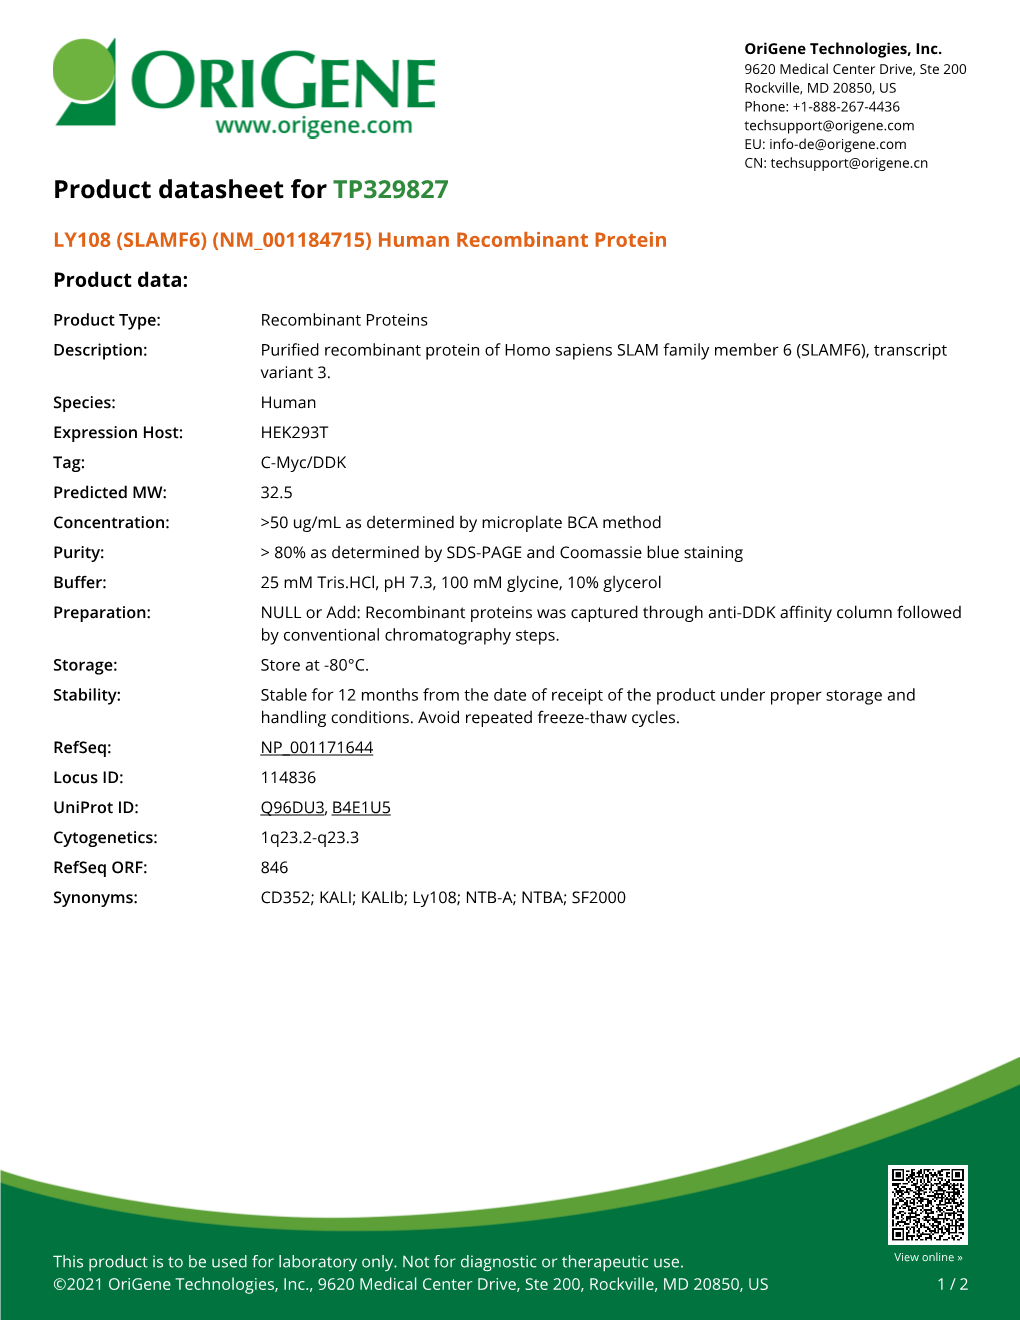 LY108 (SLAMF6) (NM 001184715) Human Recombinant Protein Product Data